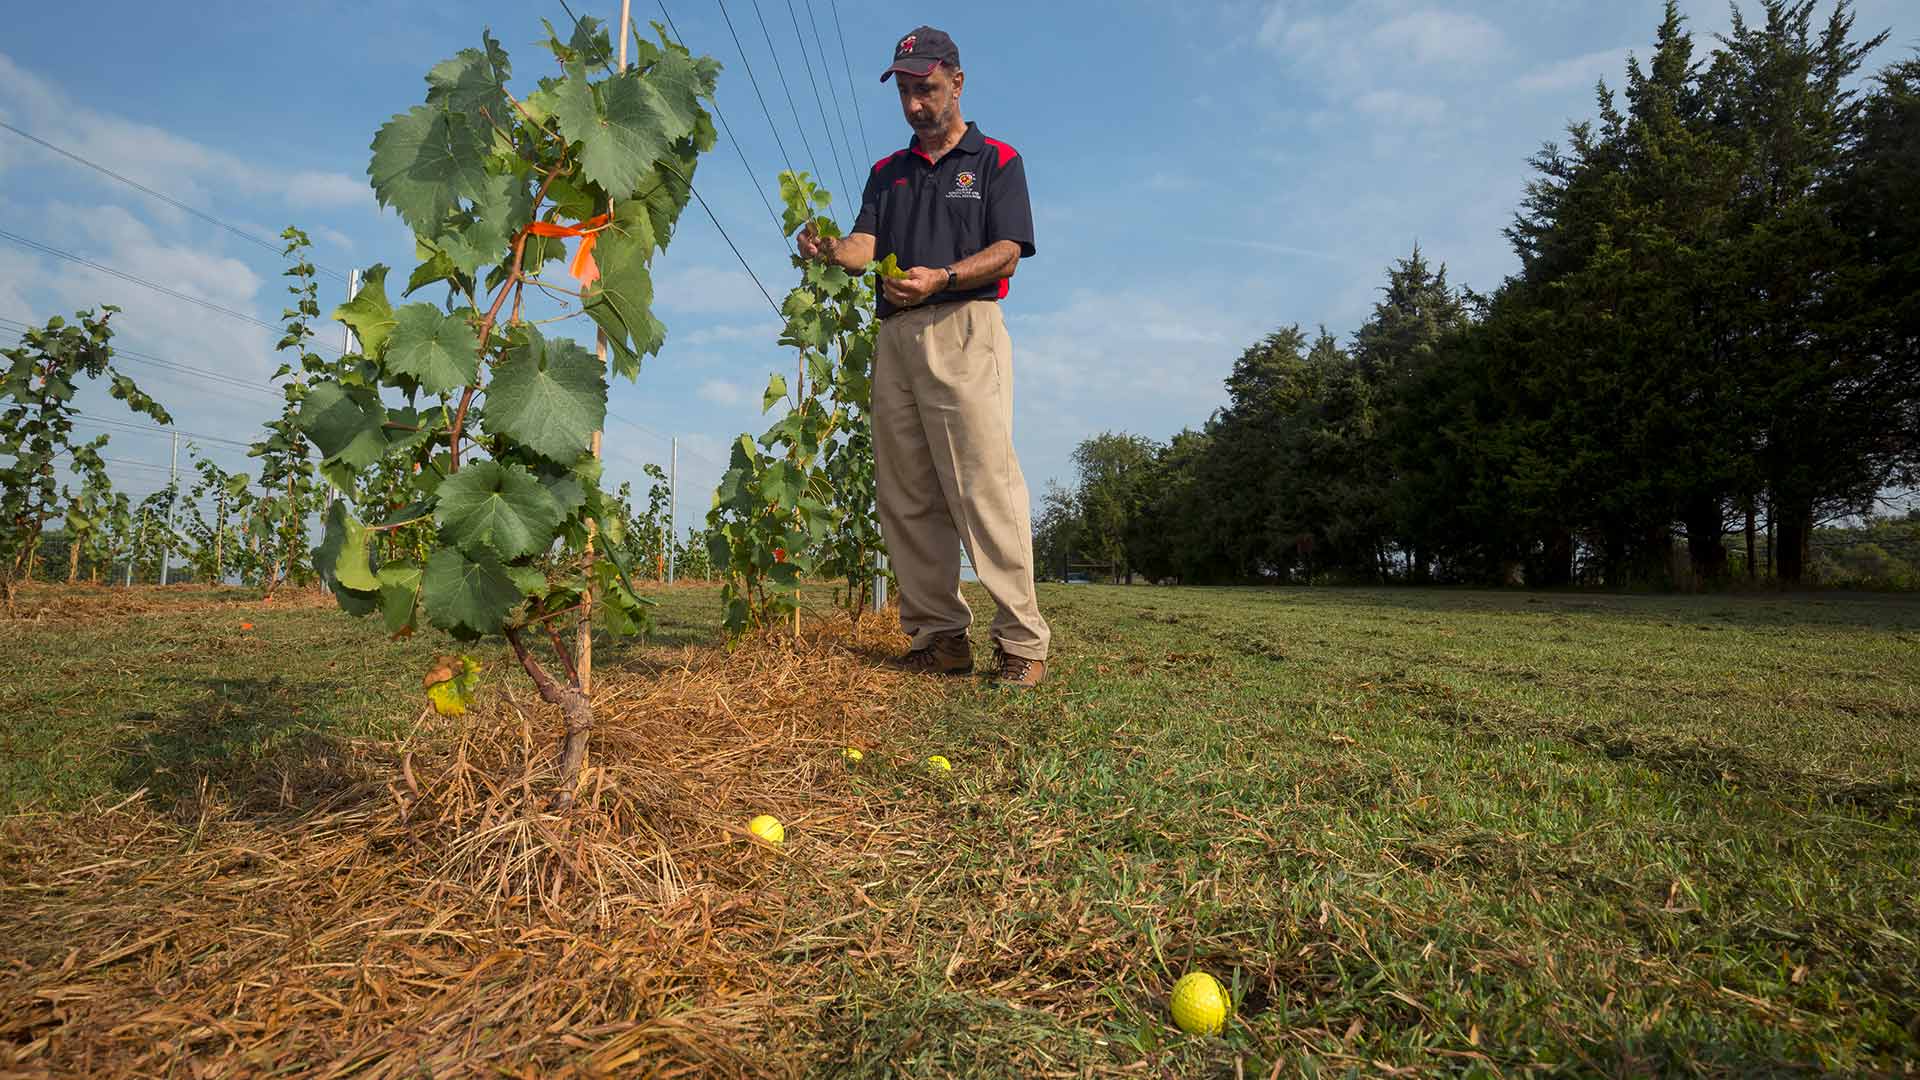 Surrounded by off-target golf balls, viticultural specialist Joe Fiola '86 of University of Maryland Extension examines grape vines planted at the Poolesville Golf Course in Montgomery County, Md. 